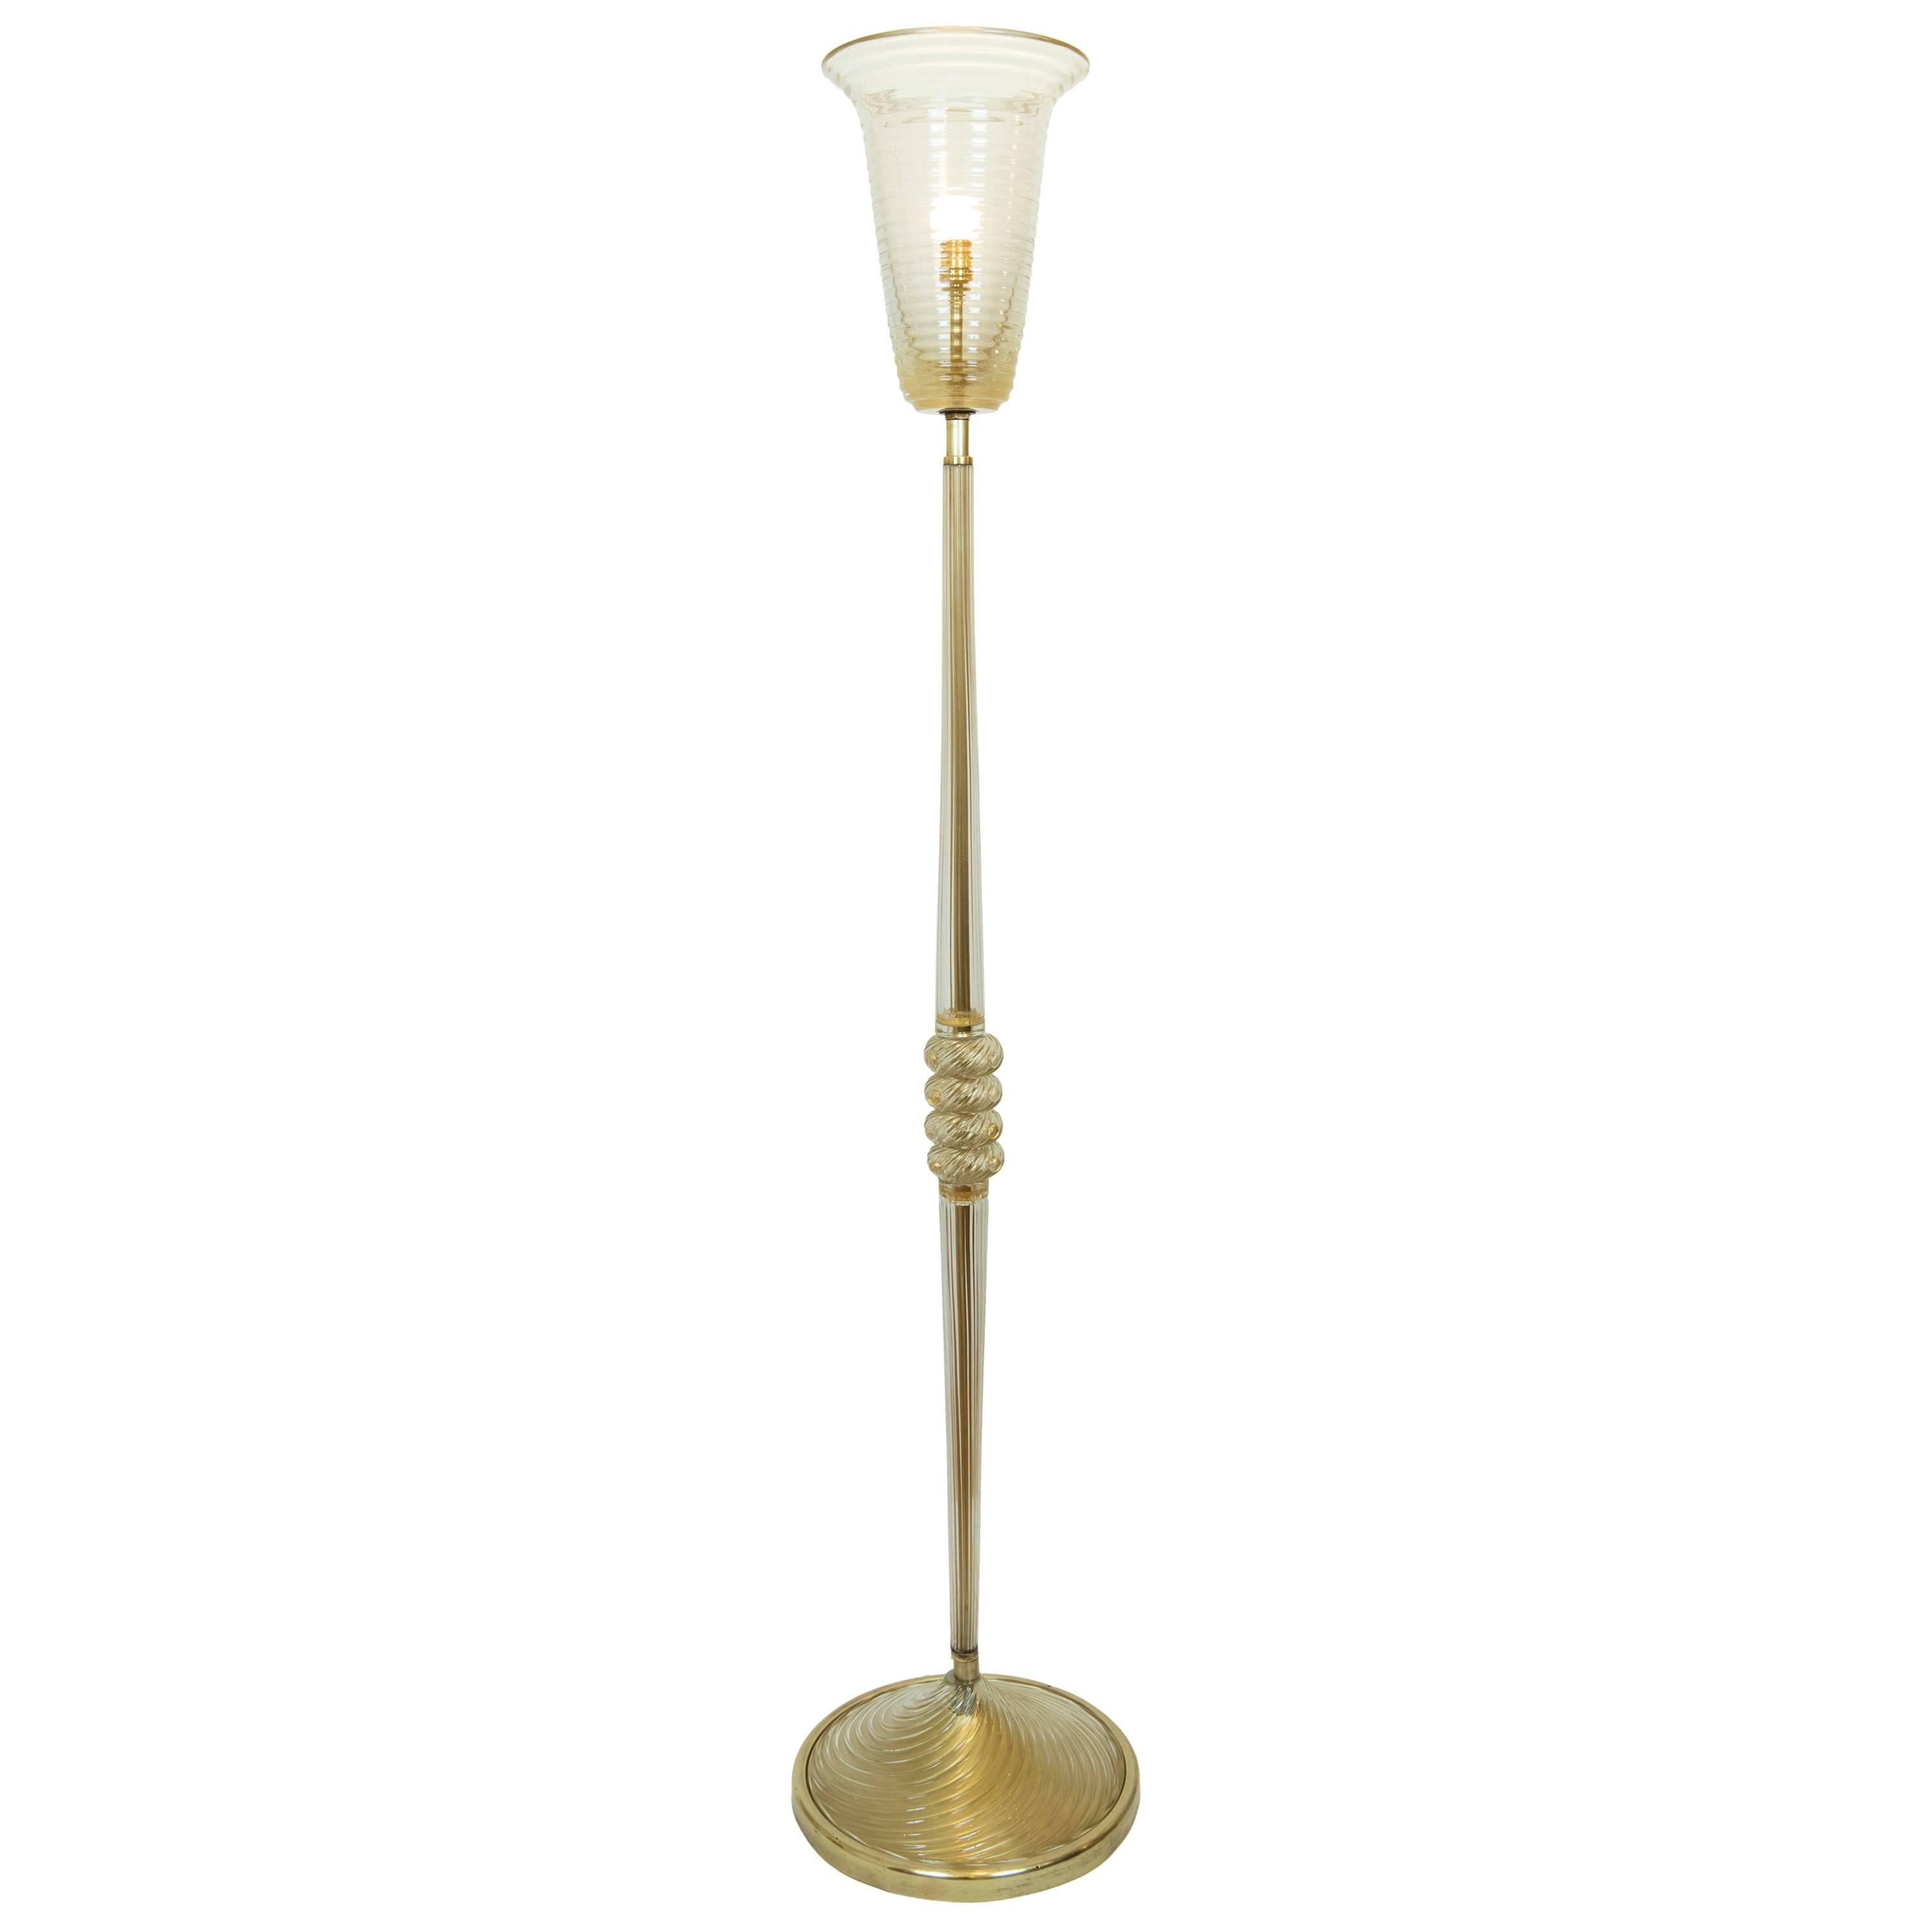 Tall Murano Glass Floor Lamp Attributed to Barovier and Toso